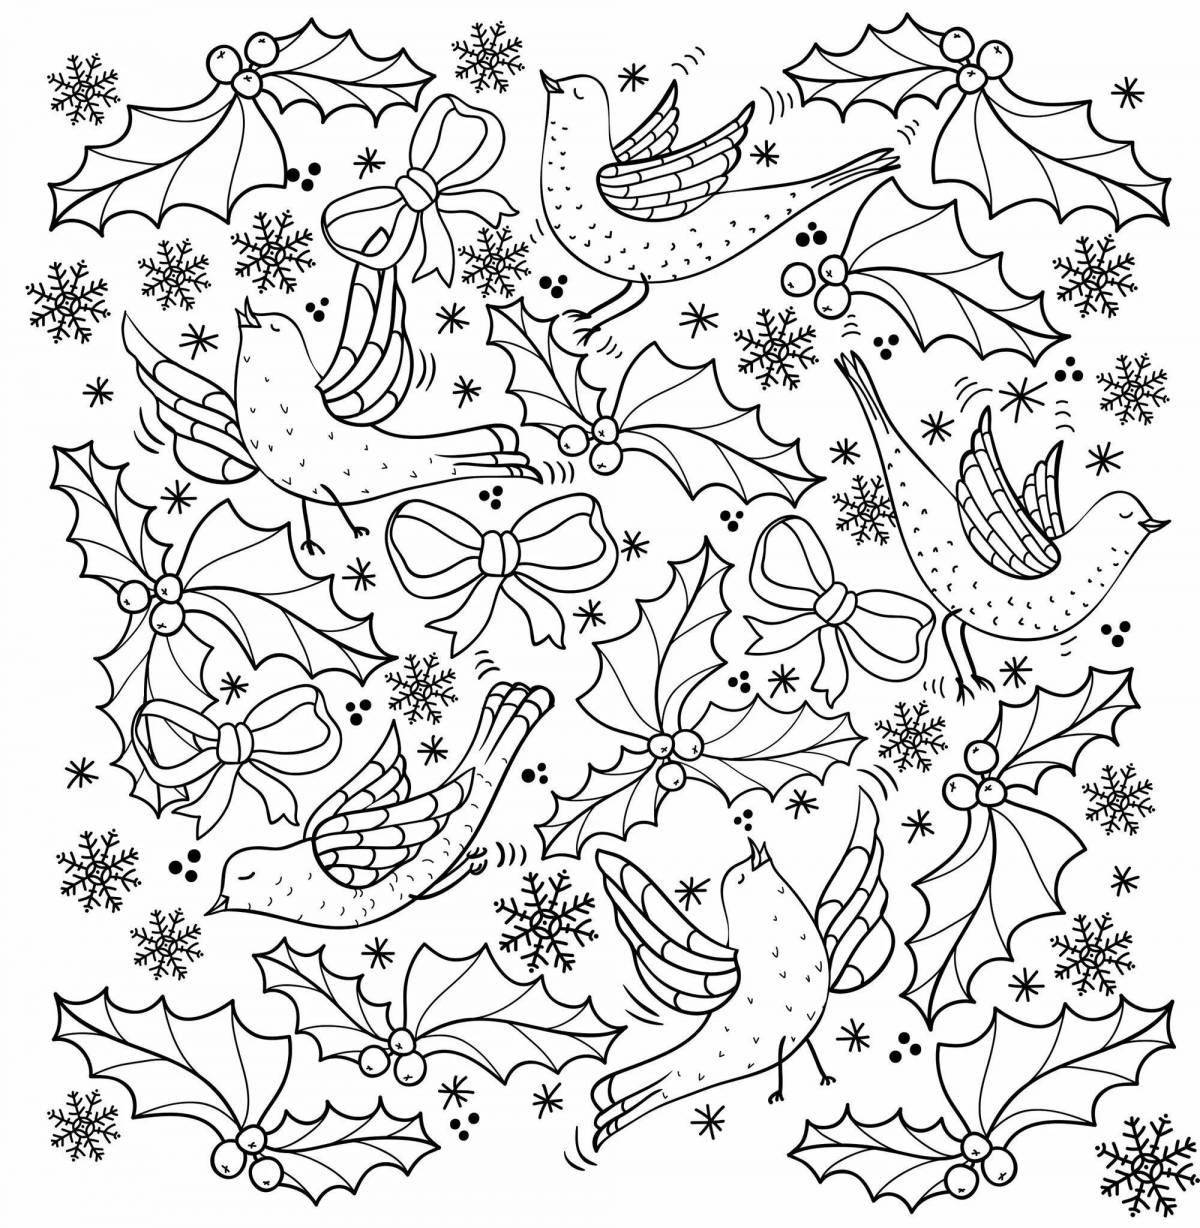 Colourful winter anti-stress coloring book for kids